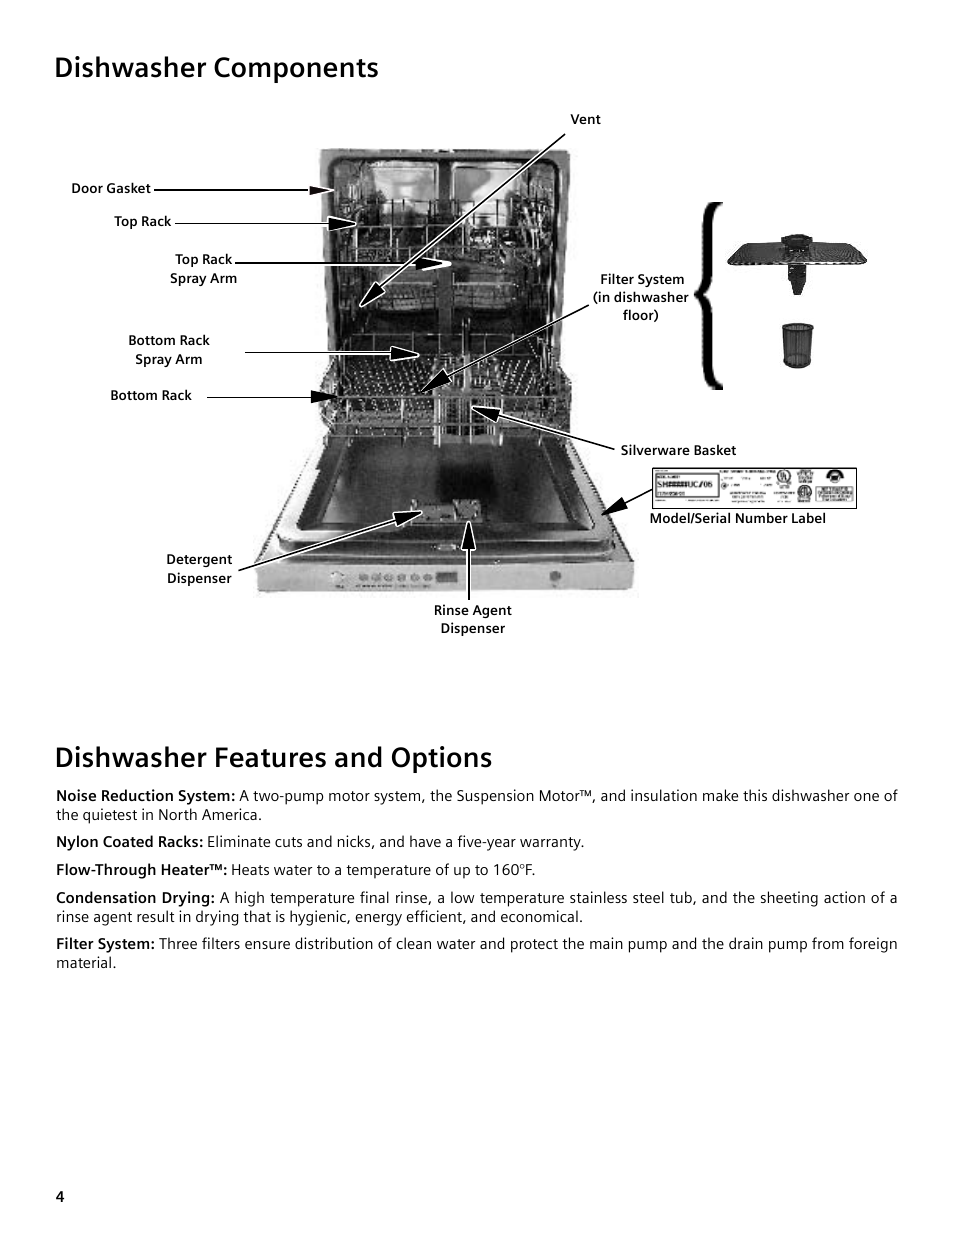 Dishwasher components, Dishwasher features and options | Bosch SHE4AM User Manual | Page 4 / 64